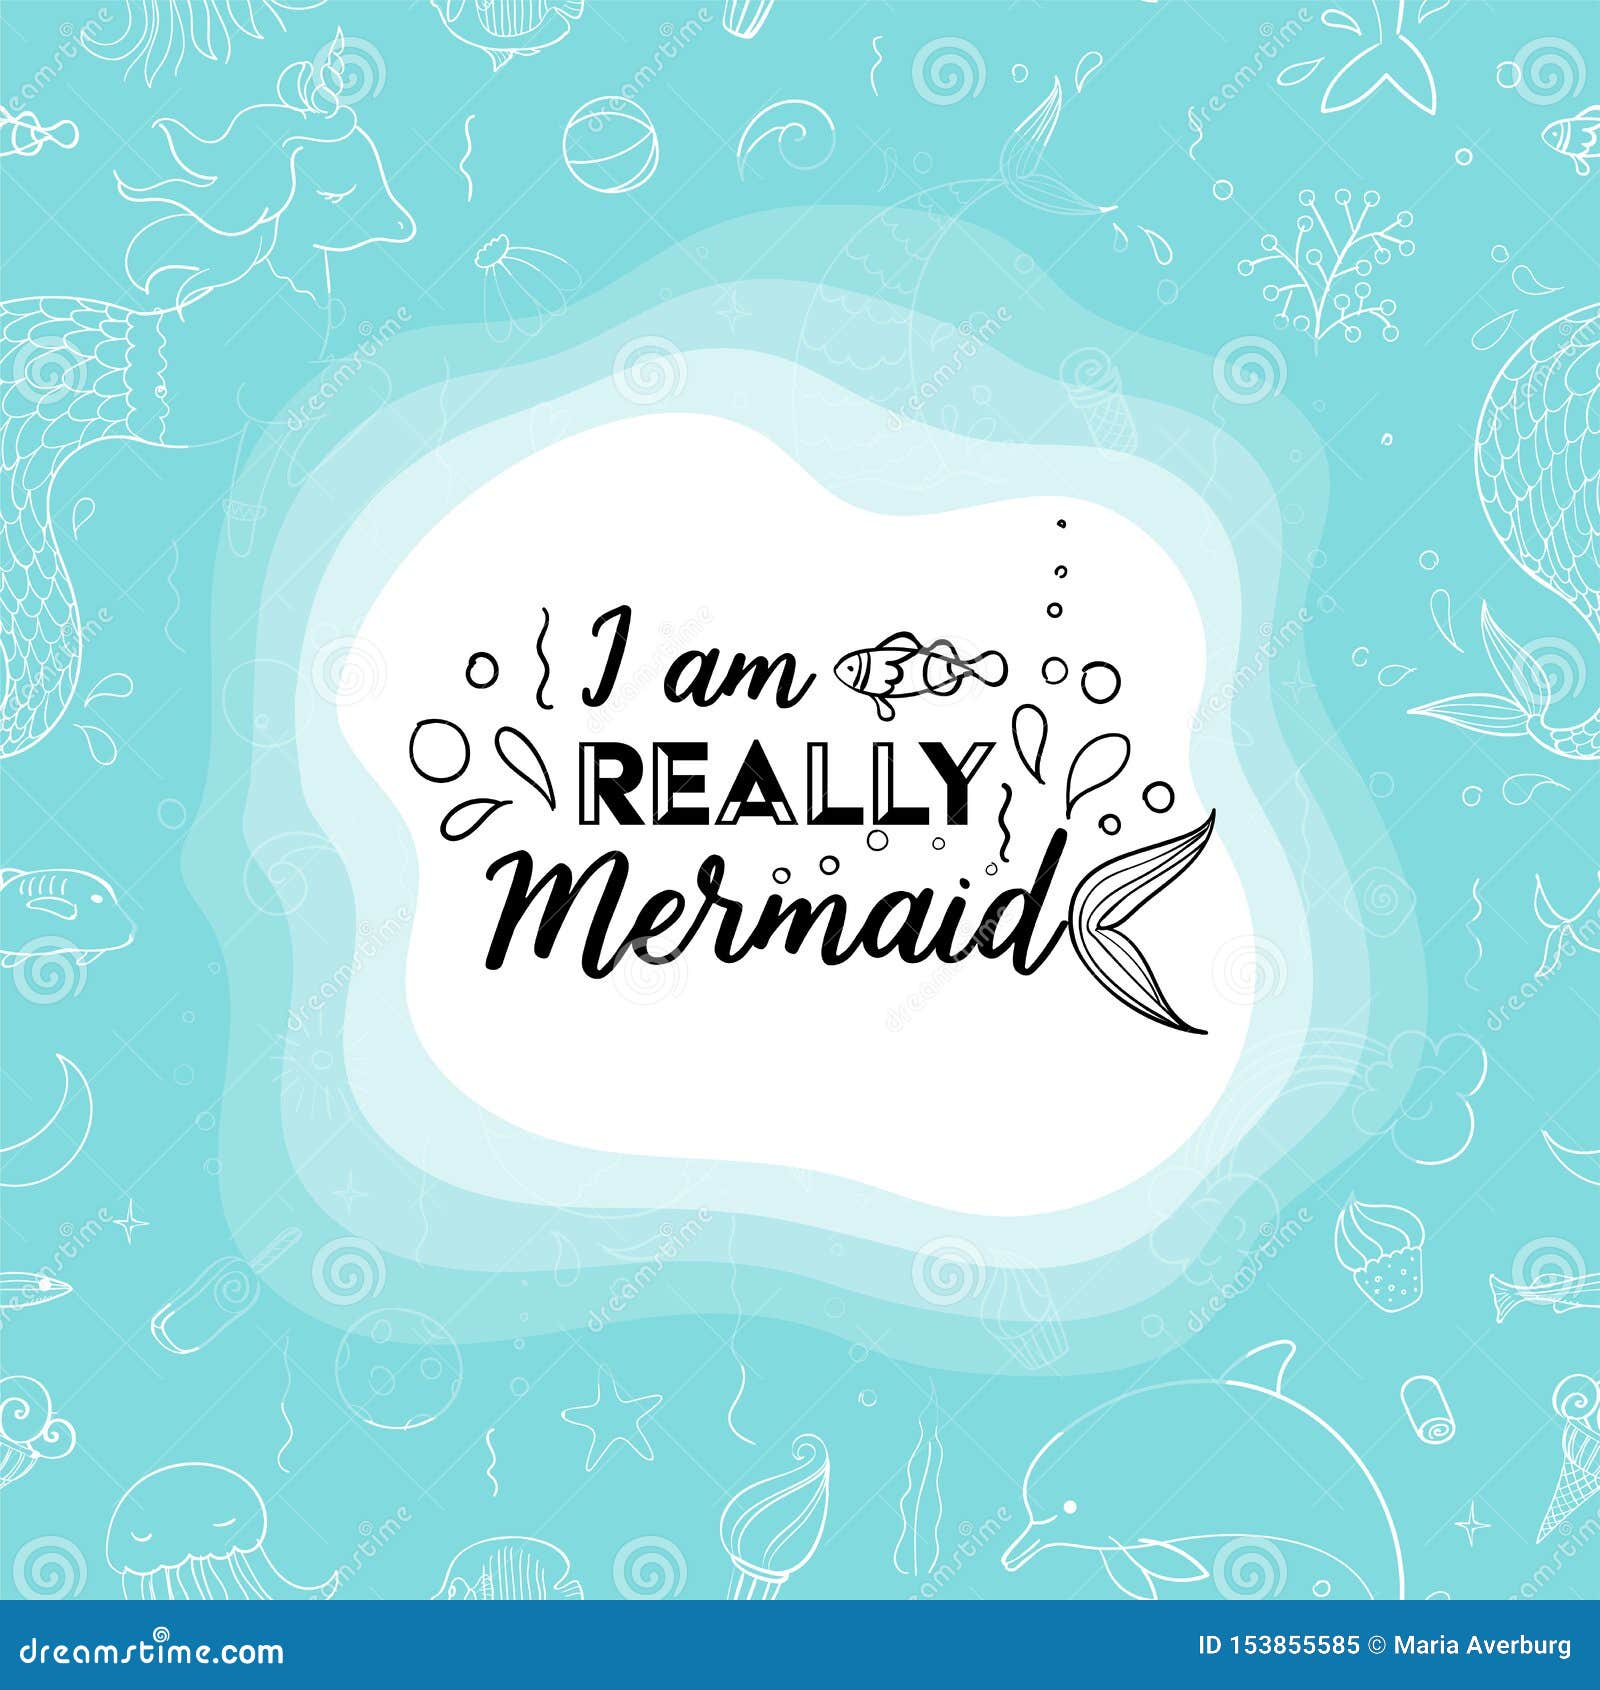 Typography Design I am really Mermaid. Seamless Pattern with Fantasy  Doodles of Mermaid Theme Stock Vector - Illustration of pattern, cloud:  153855585